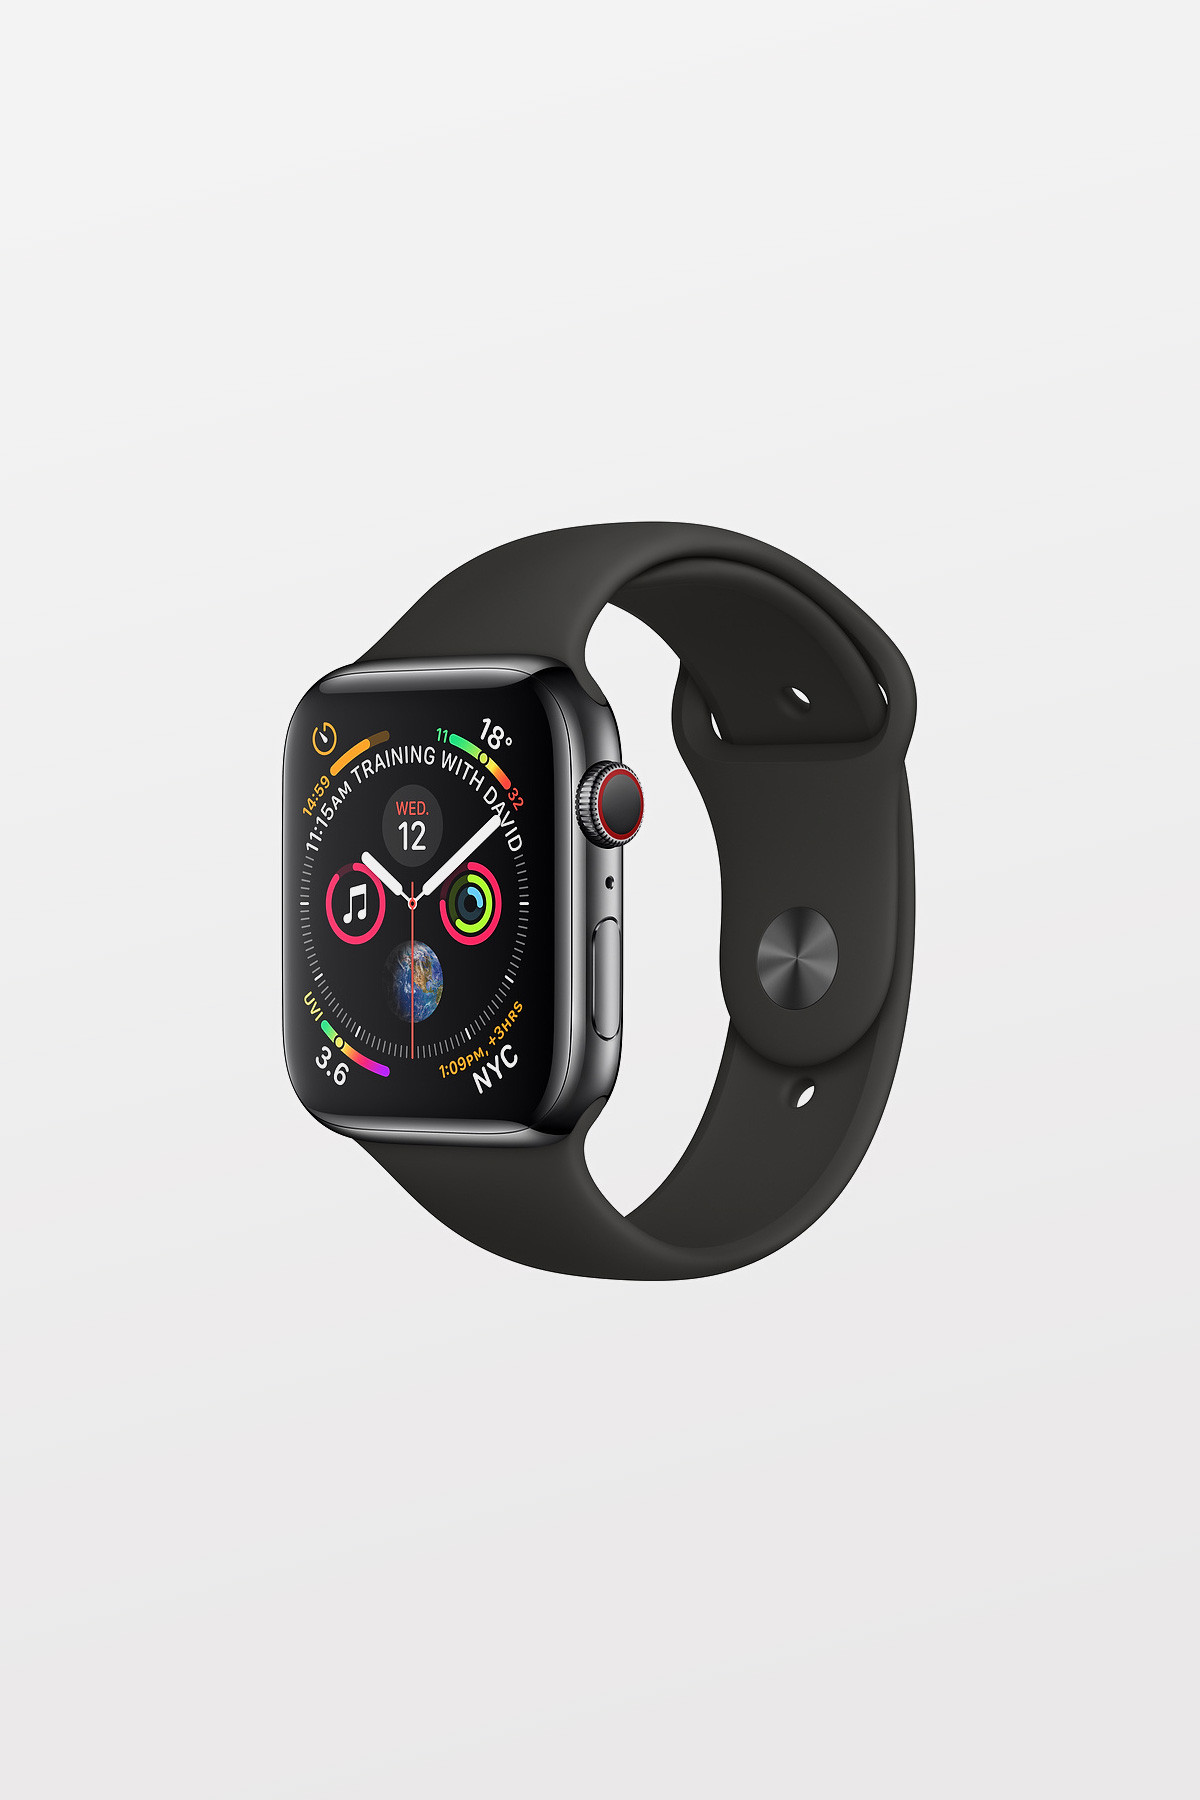 Apple Watch Series 4 GPS + Cellular - 44mm - Space Black Stainless Steel Case with Various Bands - Refurbished